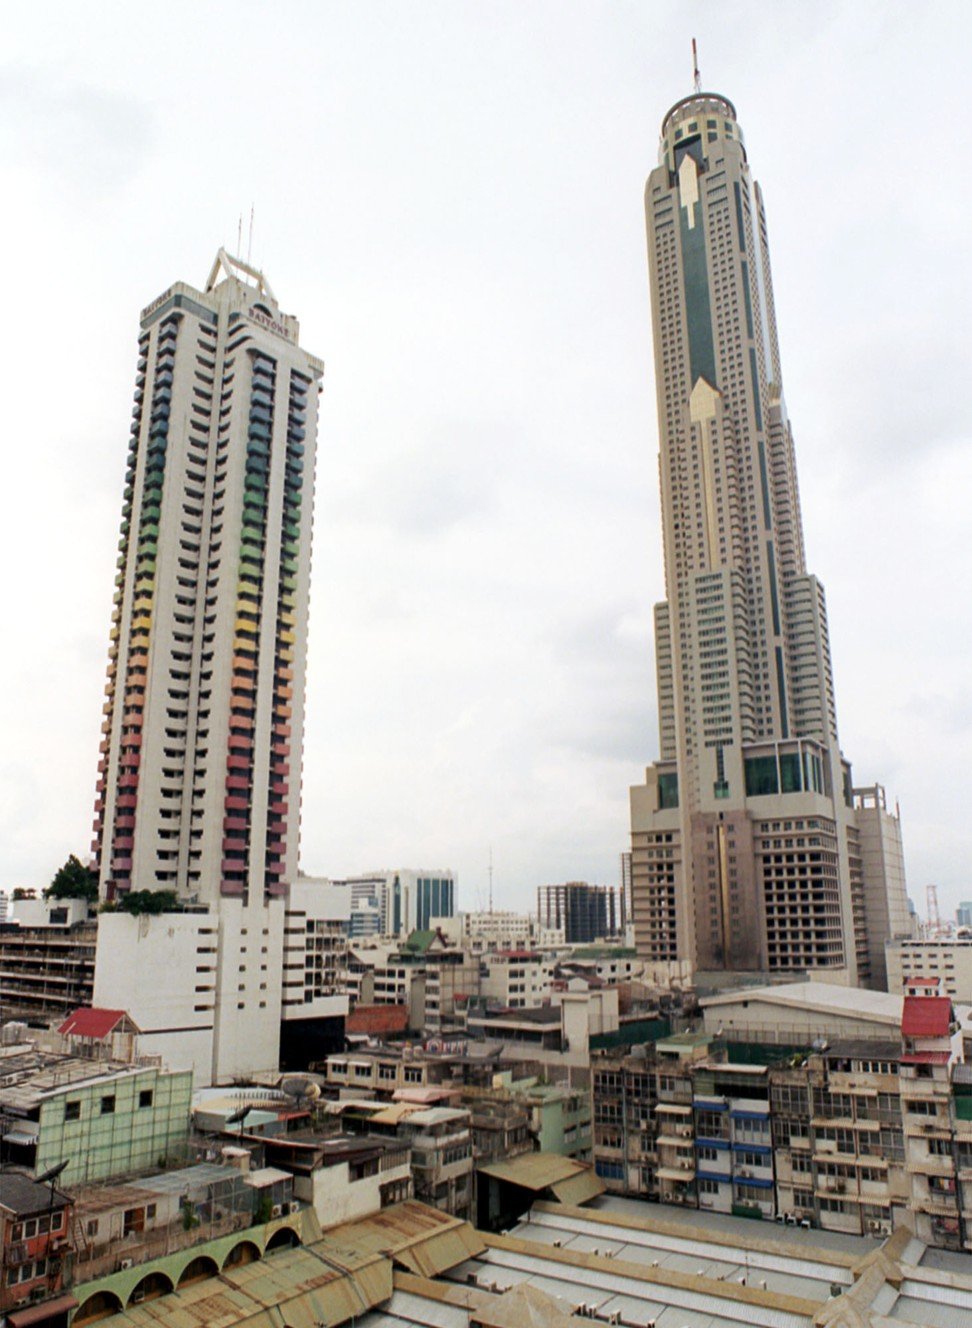 Tall stories of mystery and suspense hover around the 88-floor Baiyoke Sky Hotel in Bangkok. Photo: AP